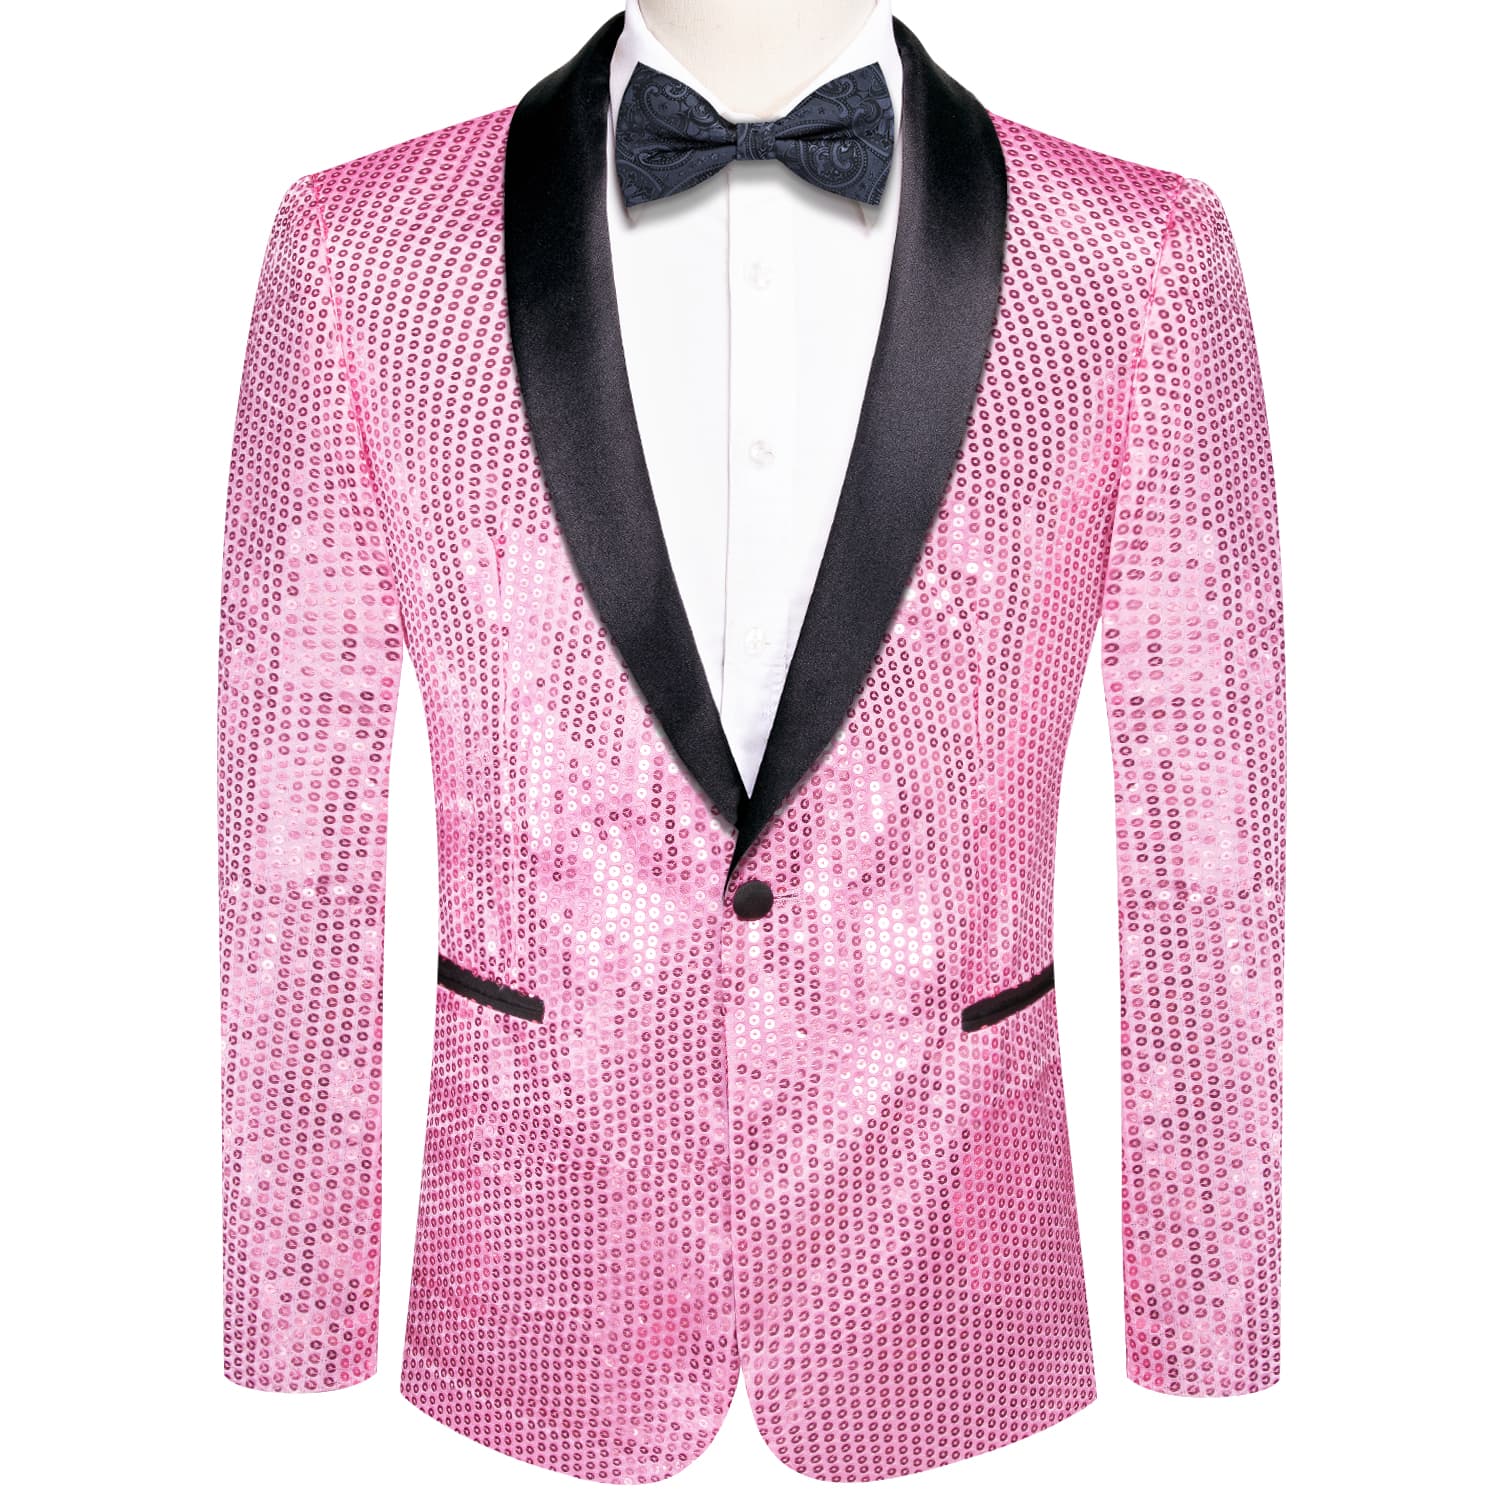  Sequin Blazer Black Shawl Collar Pink Solid Suit Tie Set for party